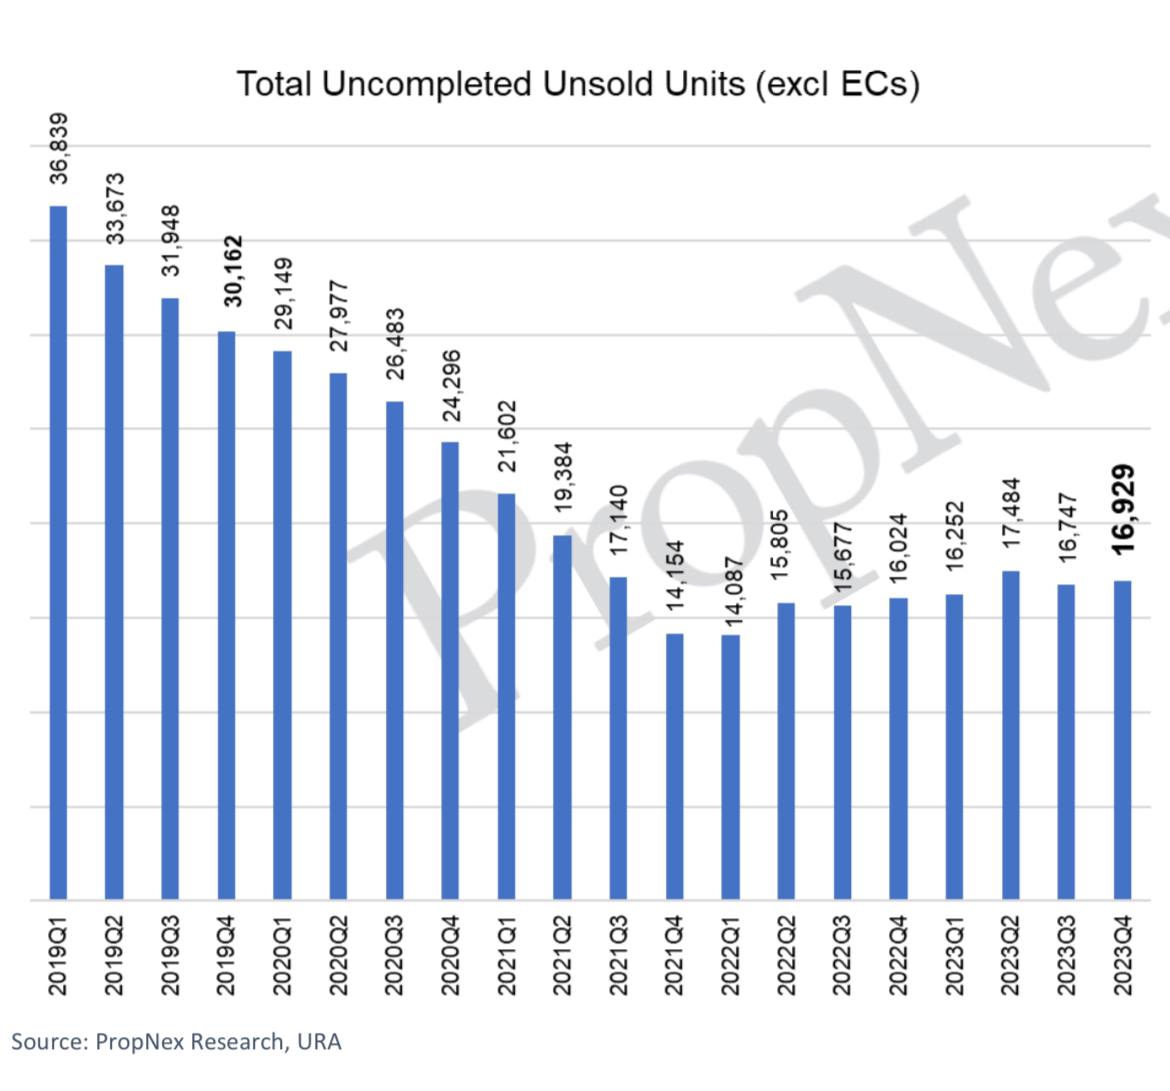 Total Uncompleted Unsold Units (excl EC)